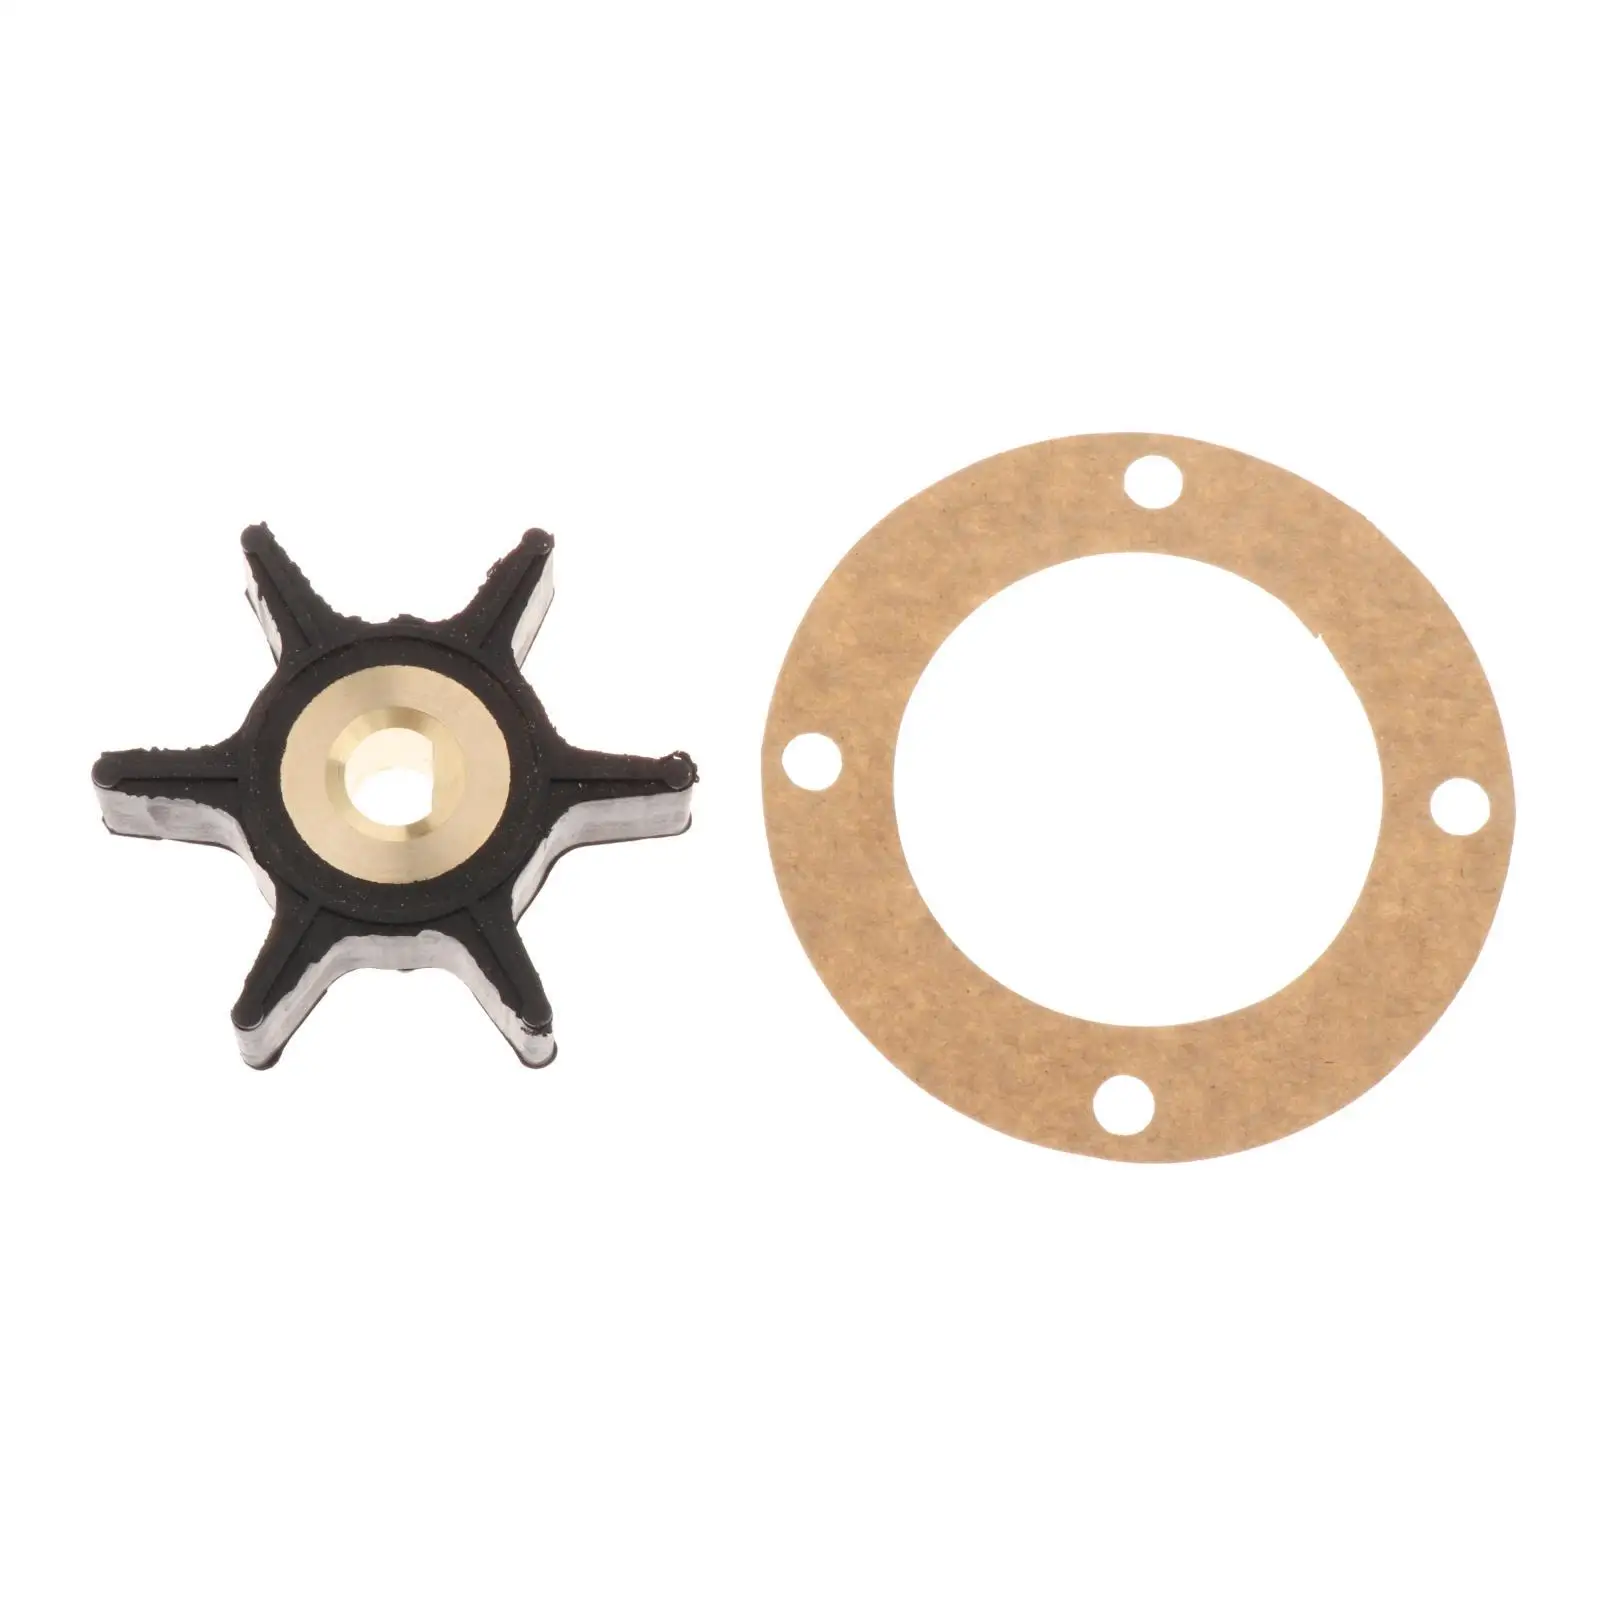 2 Pieces Impeller and 4-Hole Gasket Kit Parts Impeller Kit Replacement Fit for Onan 131-0386 170-3172 Mcck 4.0 kW Water Pump